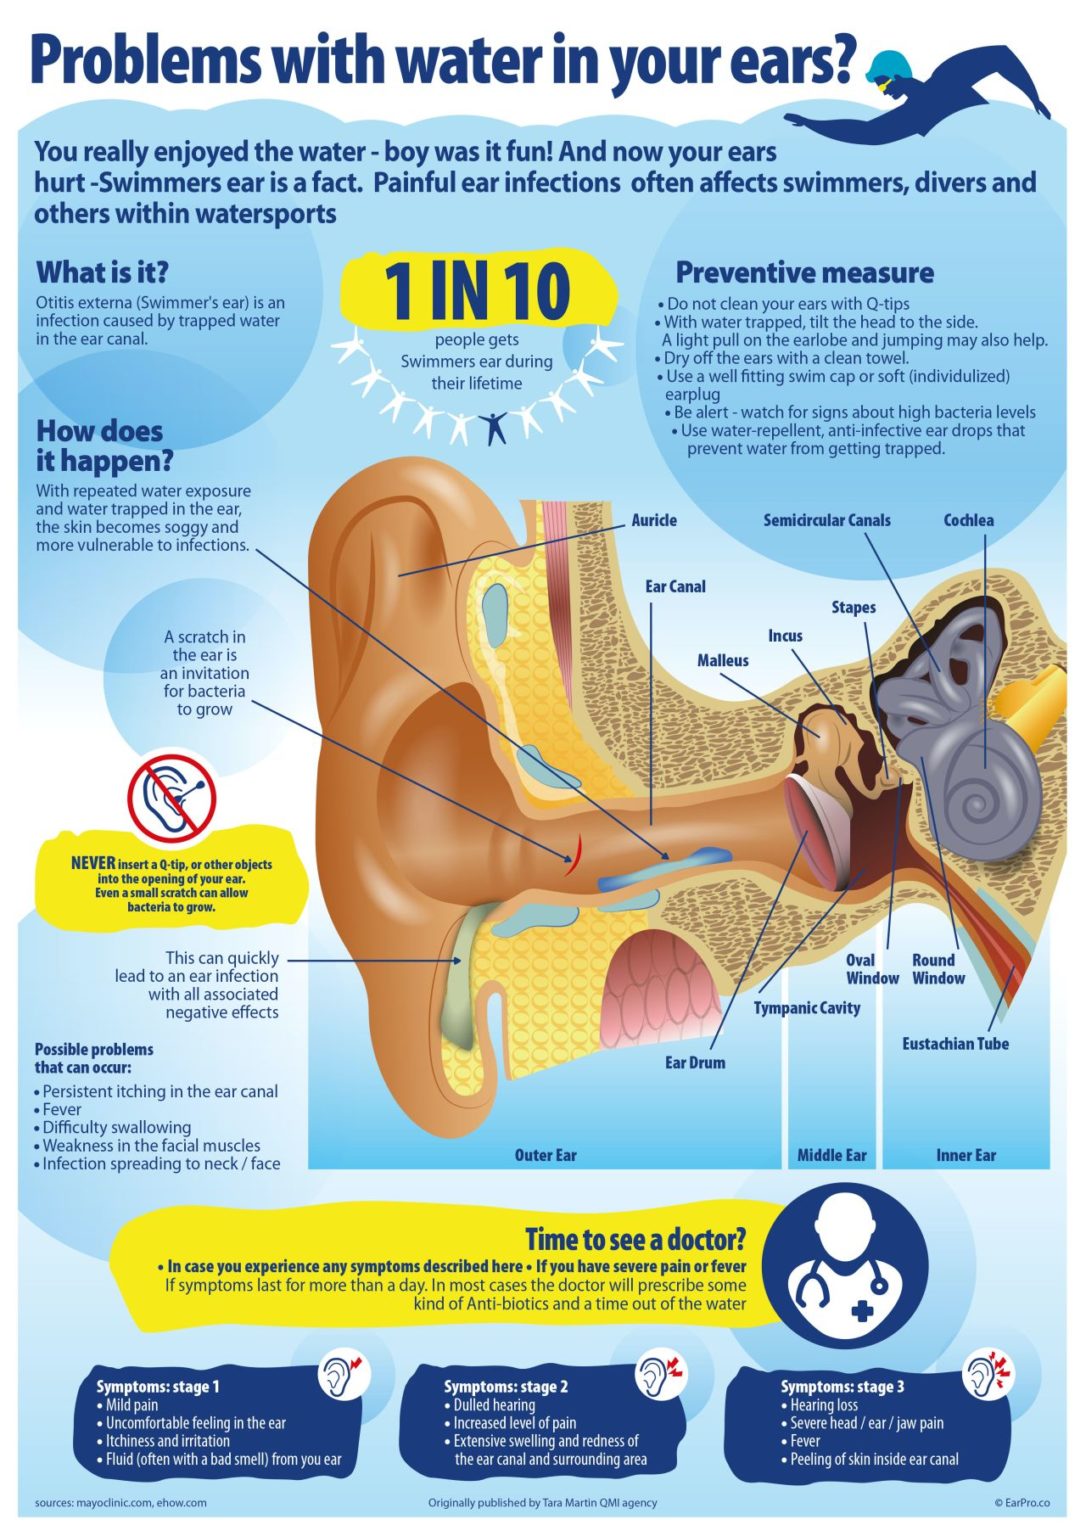 Can an audiologist tell if there fluid in your ear?